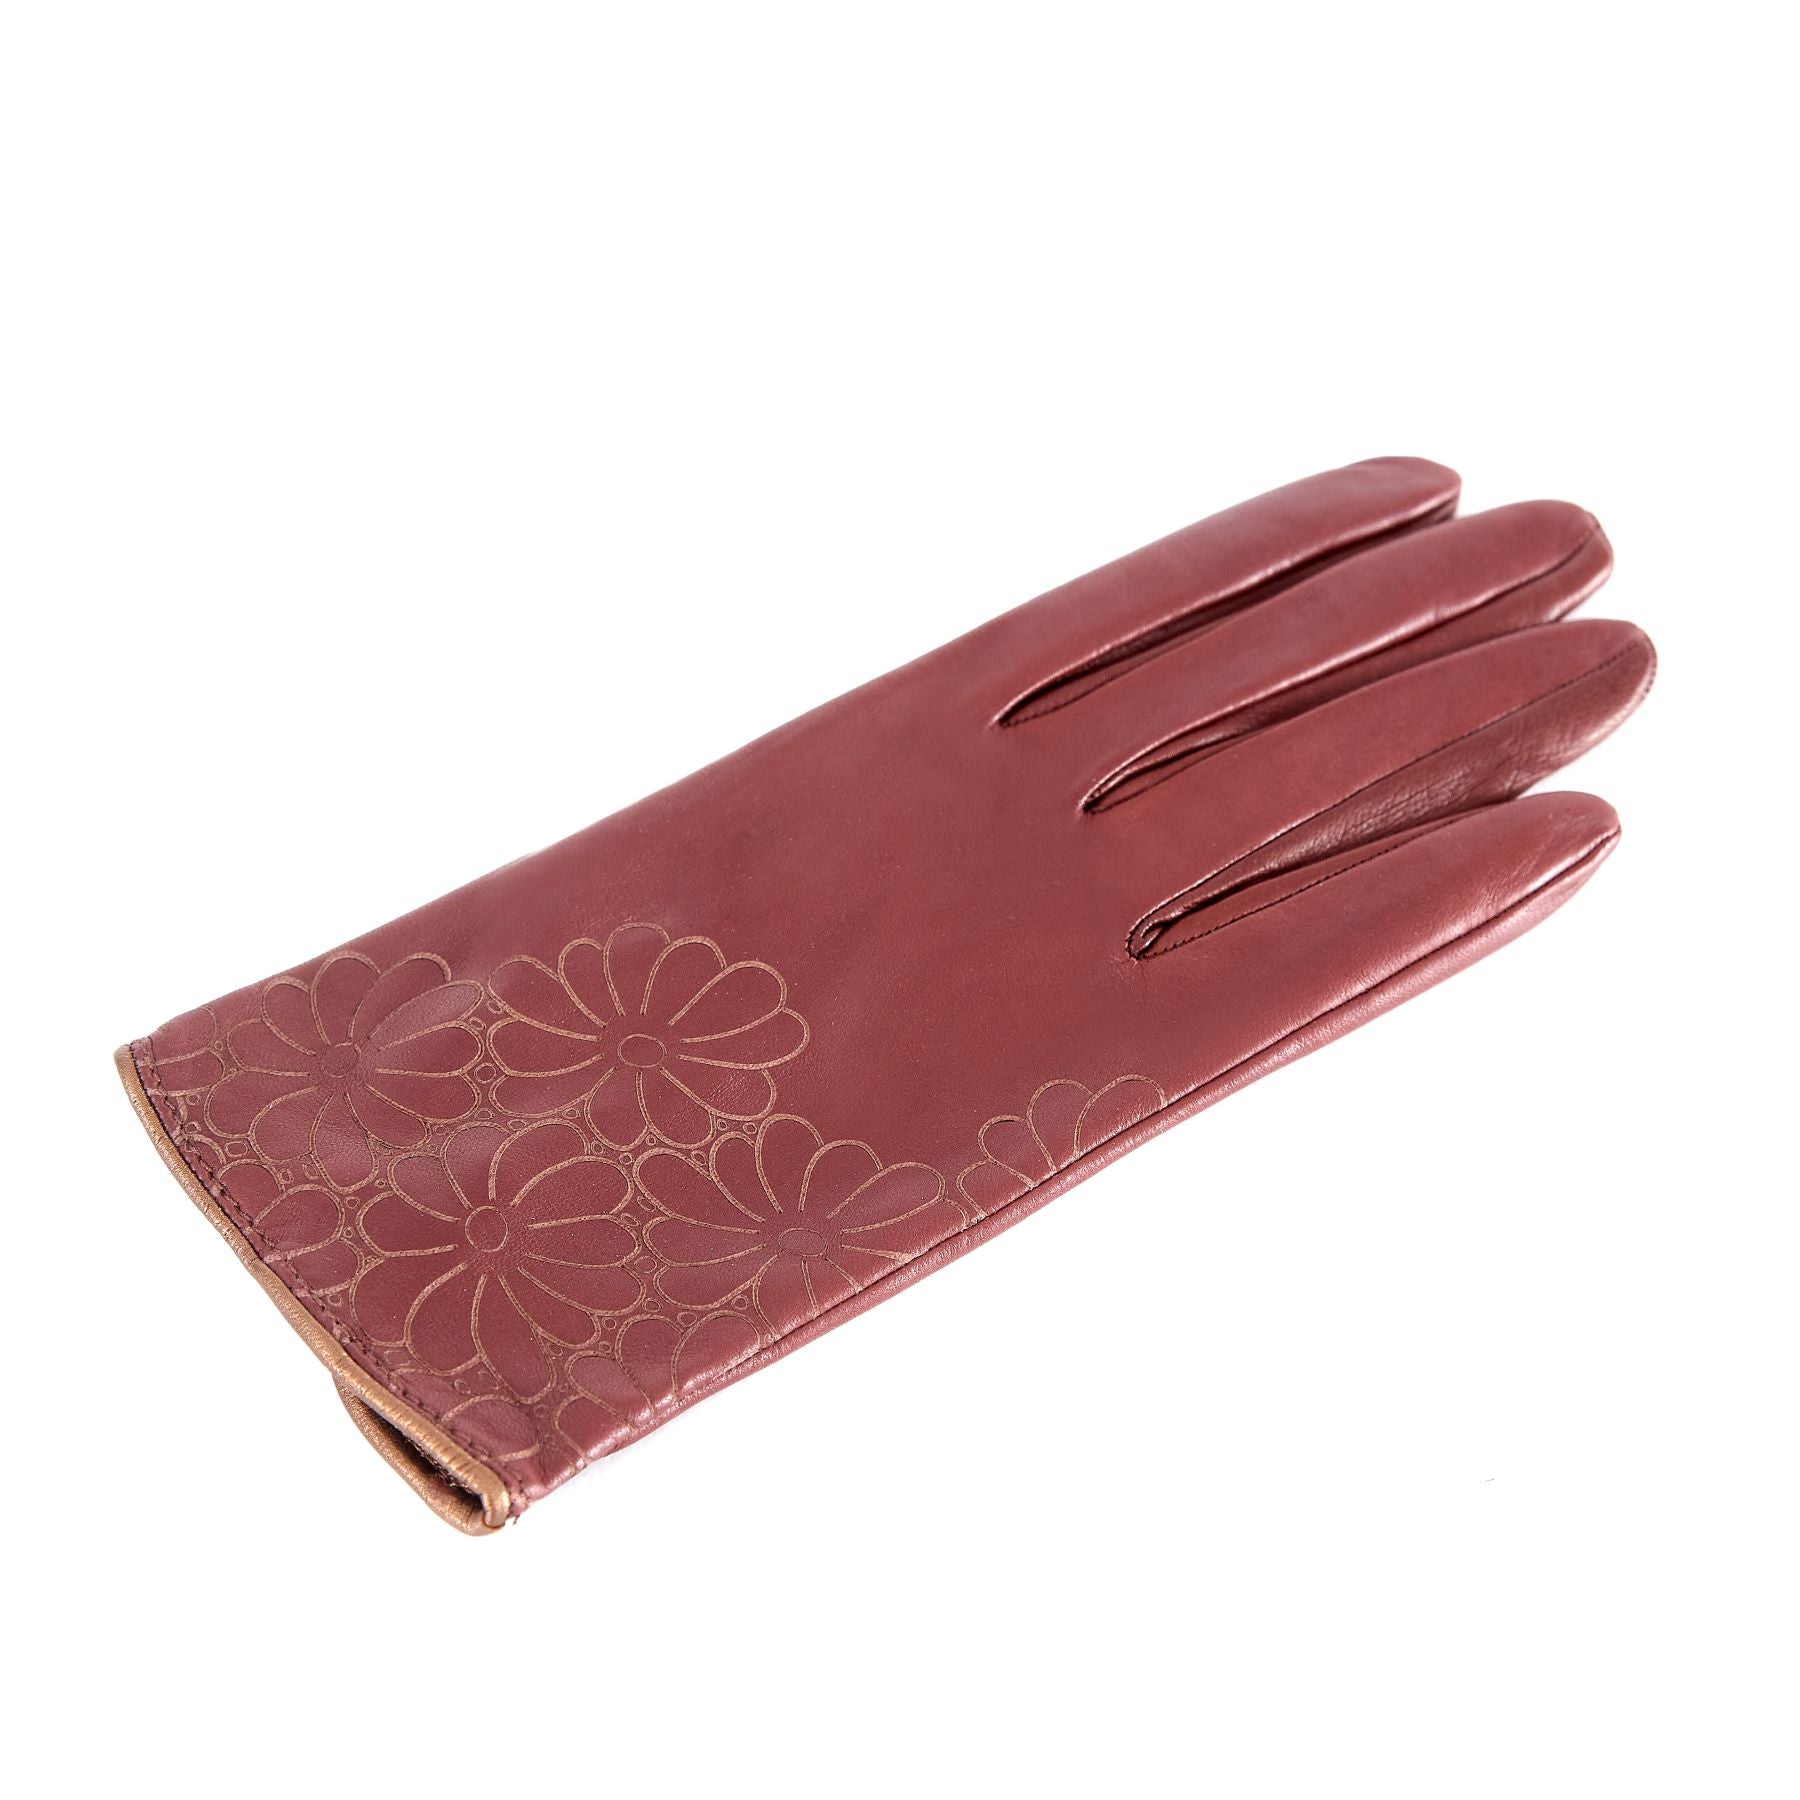 Women's unlined light brown nappa leather gloves with floral detail